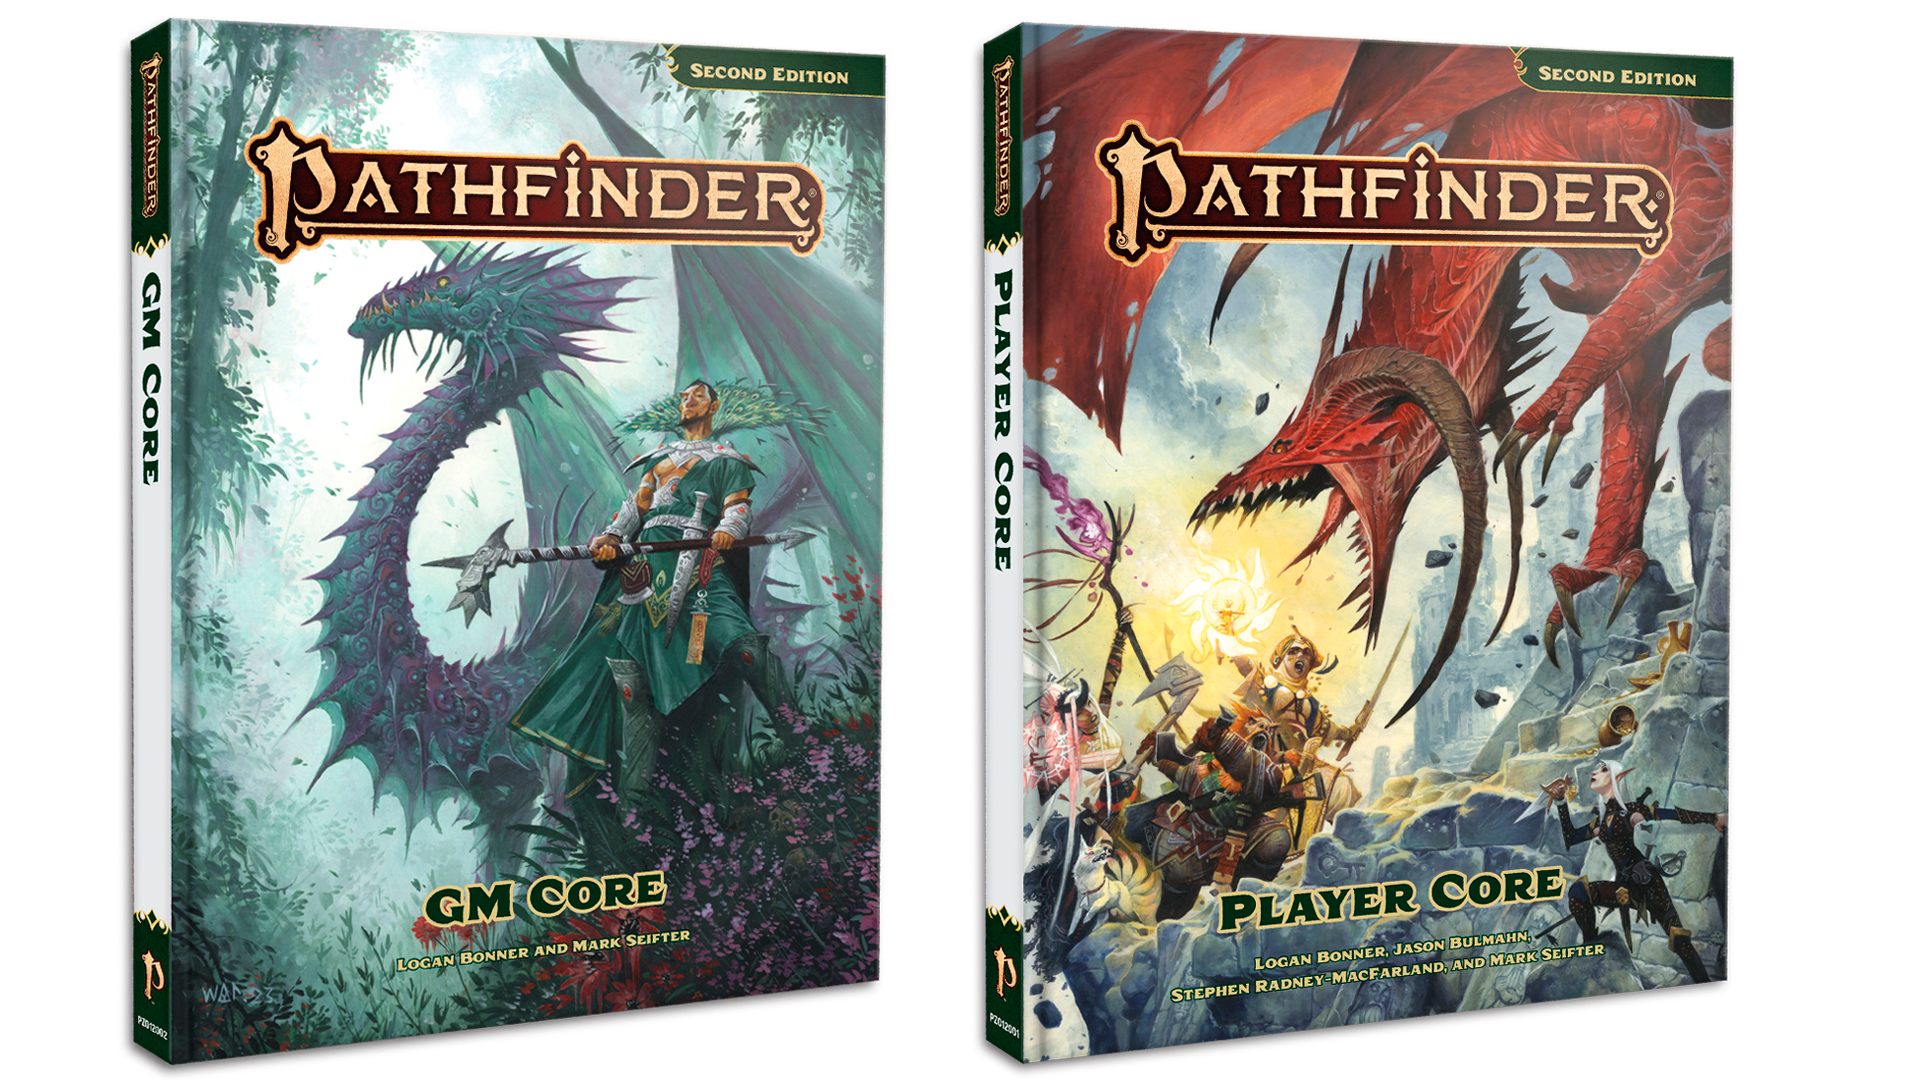 Side by side images of the Player Core and GM Core hardcovers. Player Core features a party of iconics battling a diabolic dragon. GM Core features Xanderghul standing in front of a mirage dragon.